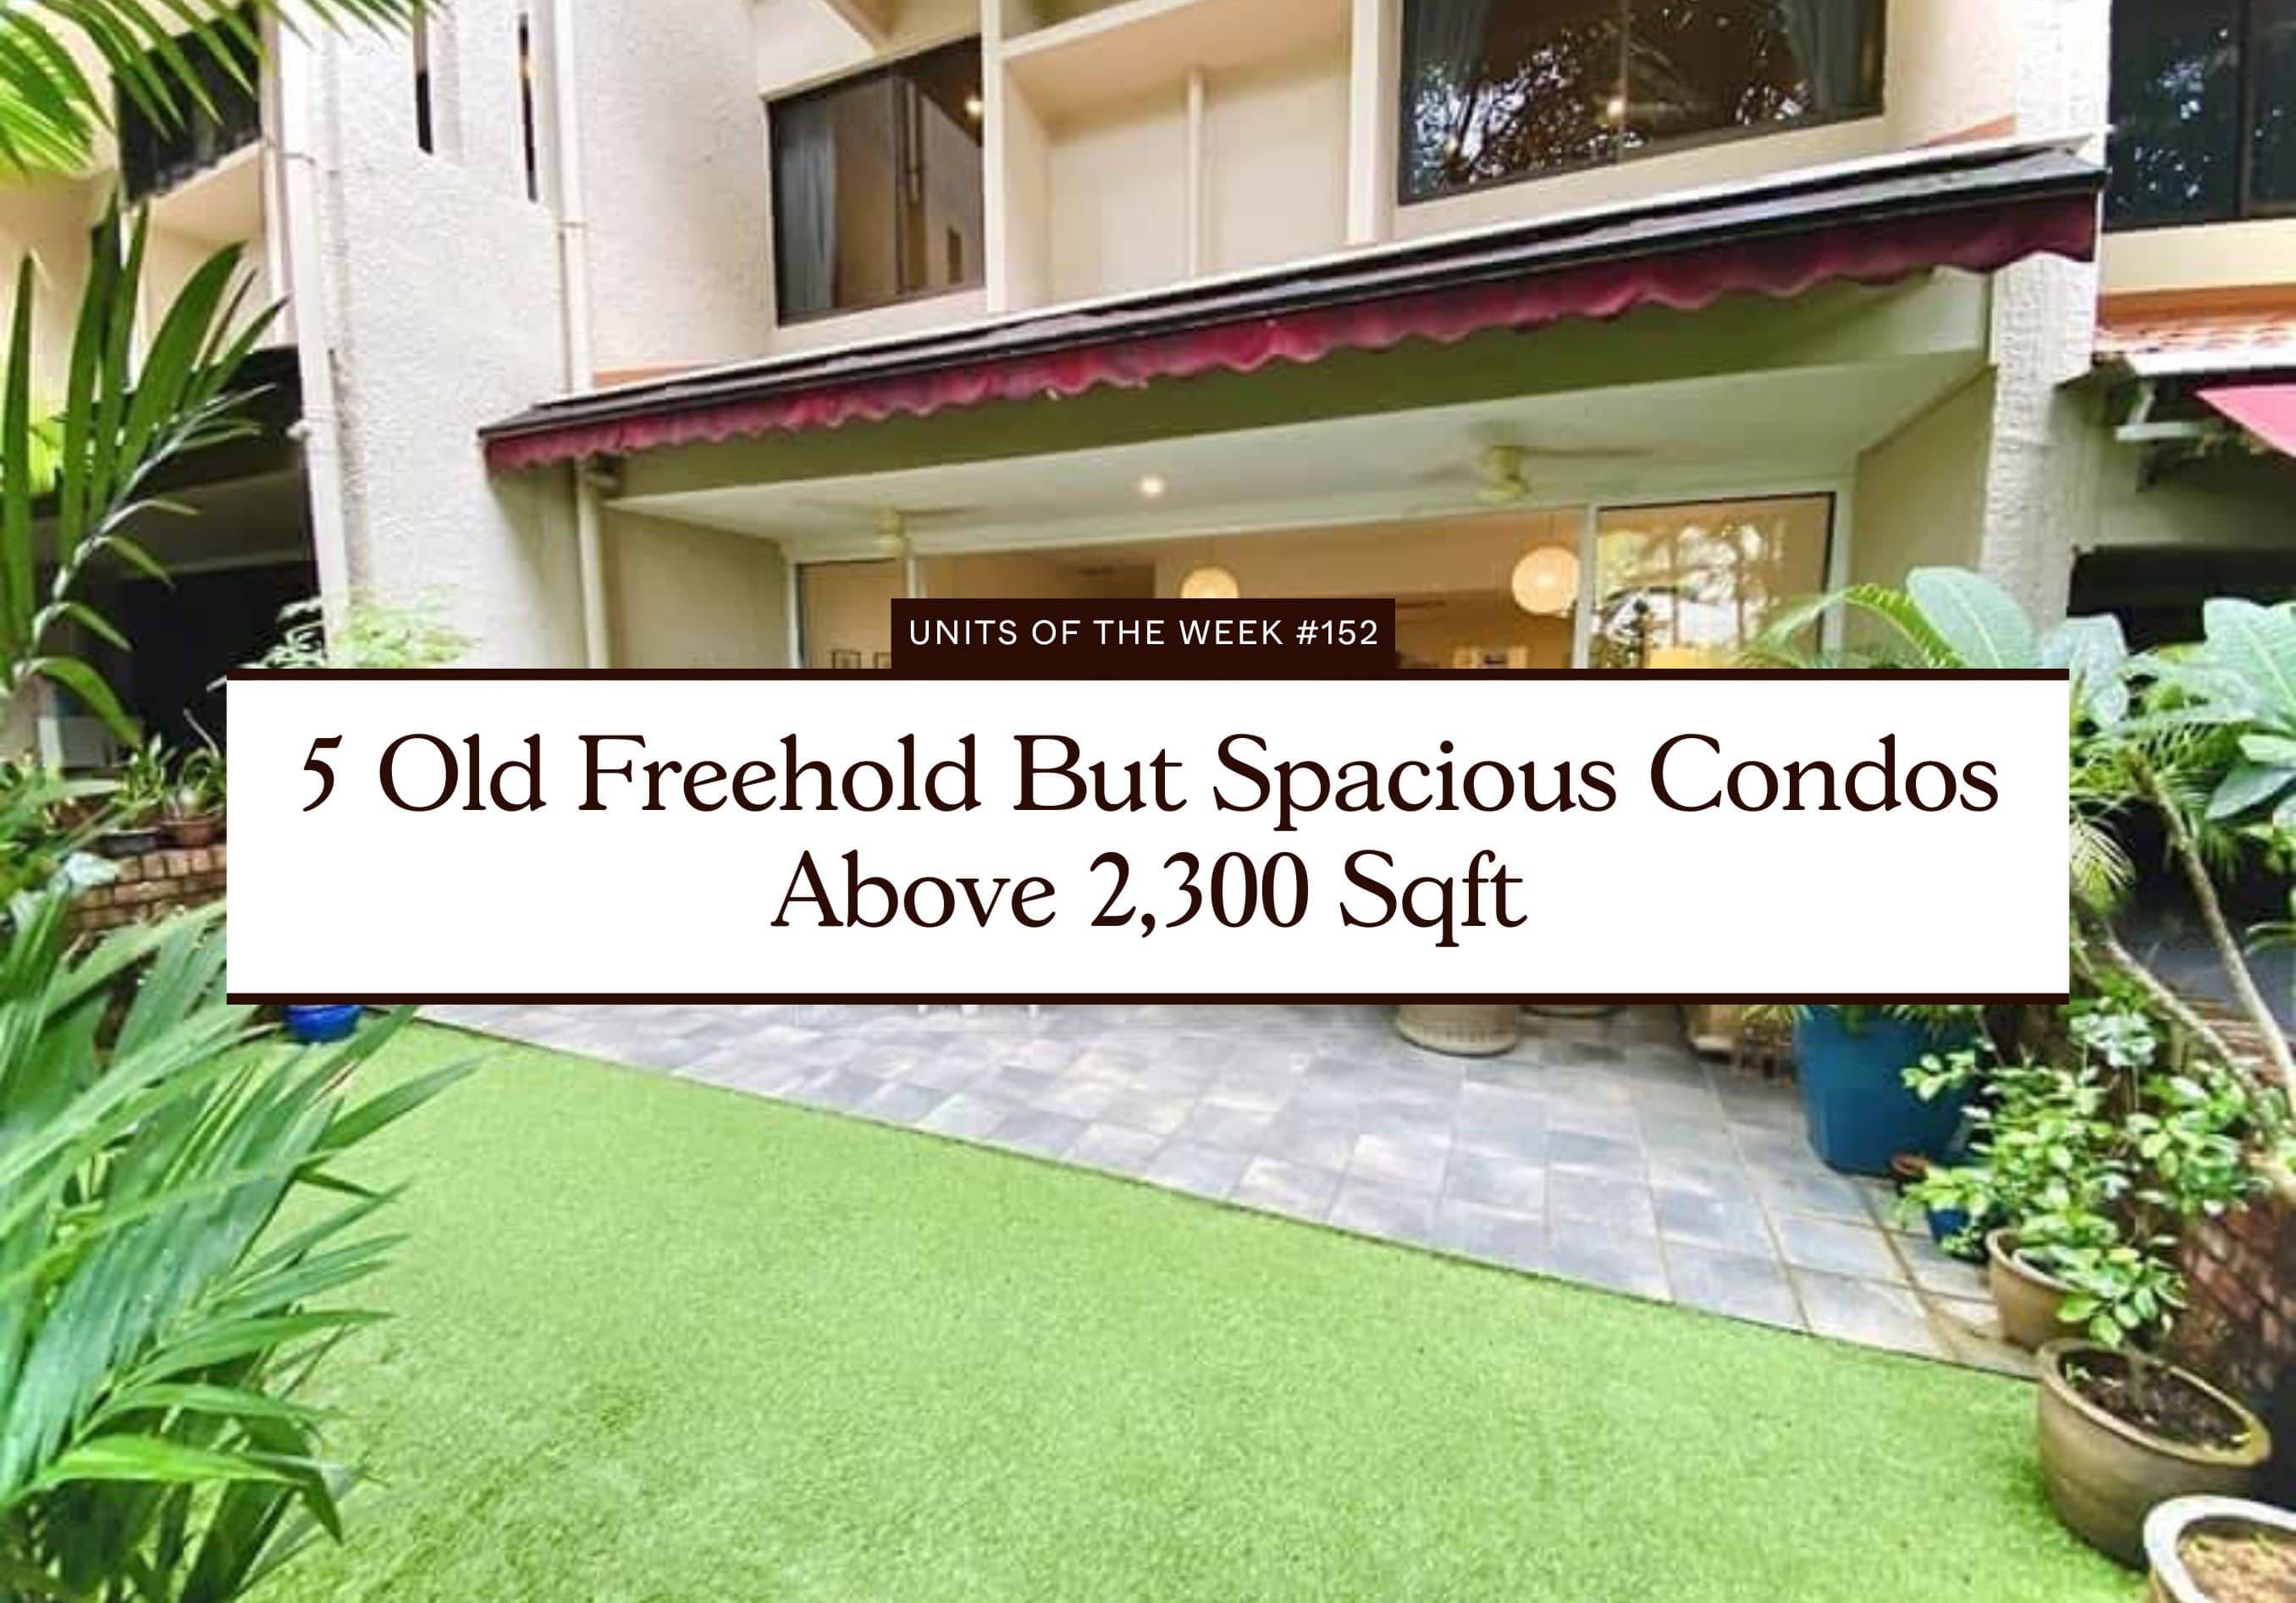 5 Old Freehold But Spacious Condos Above 2,300 Sqft